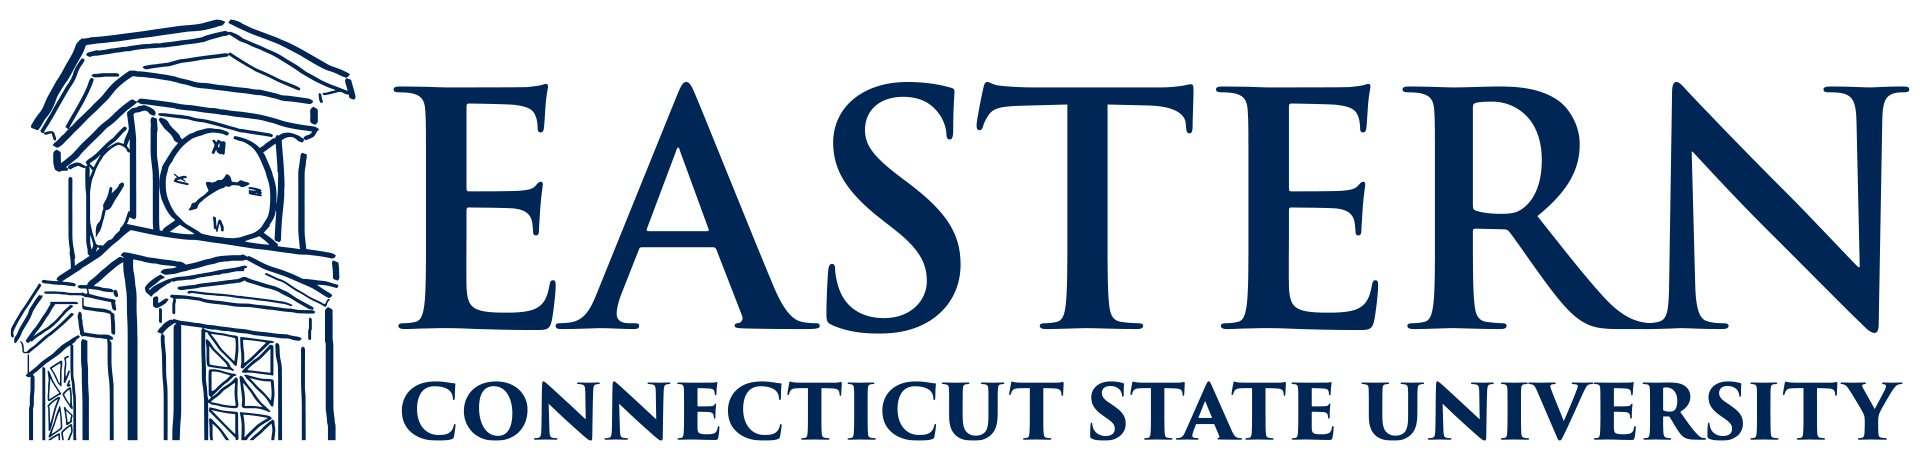 logo for Eastern Connecticut State University